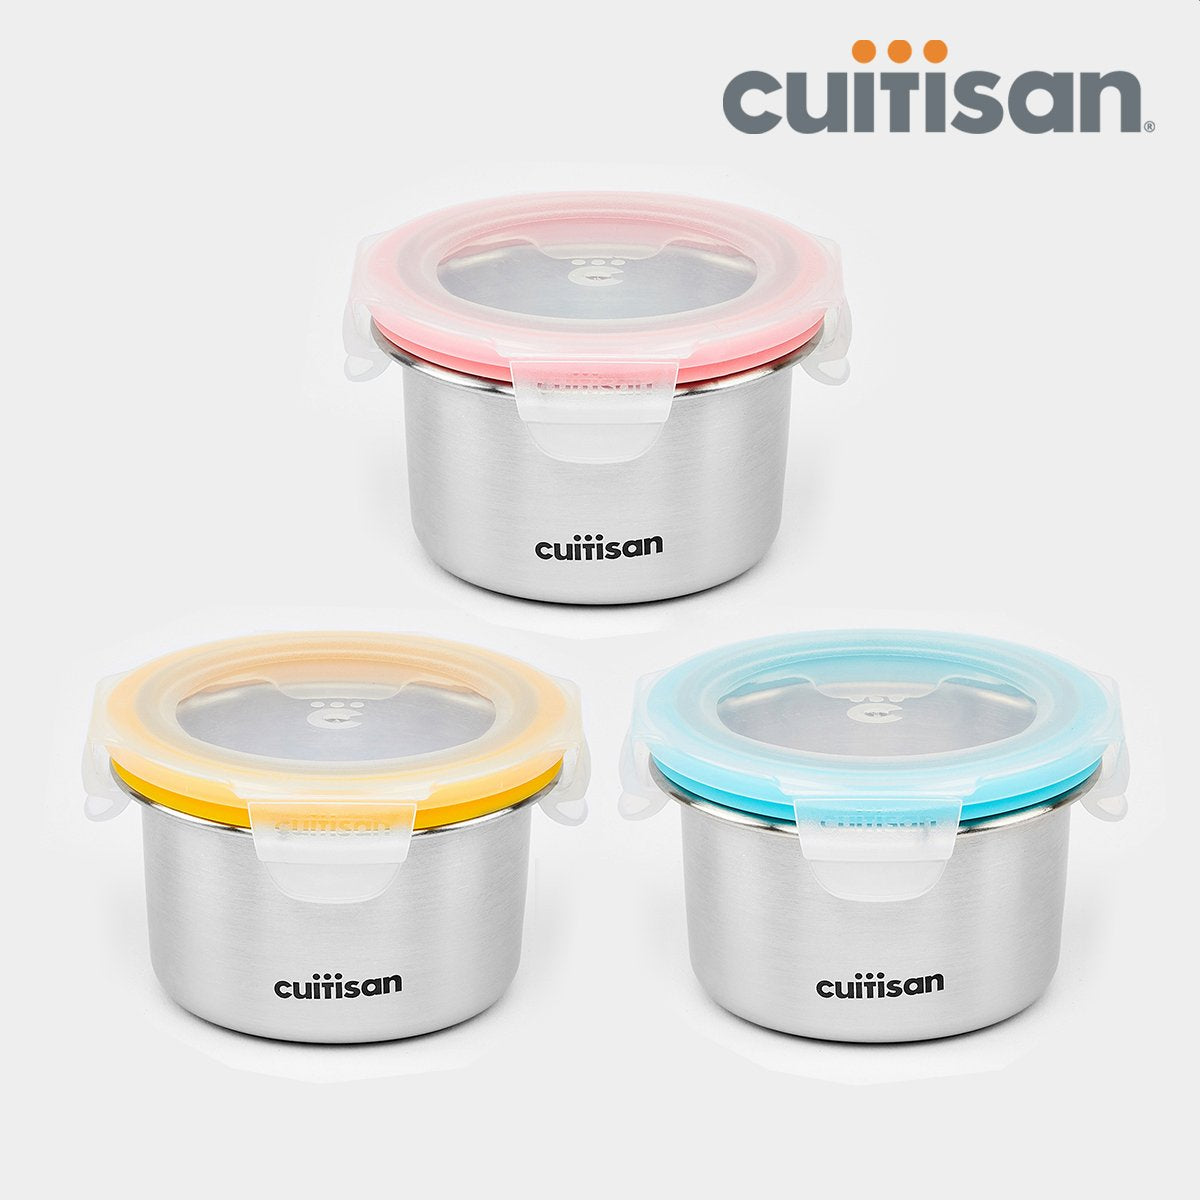 Cuitisan Baby Microwave-safe Lunch Box Set - 250ml (3p Set)